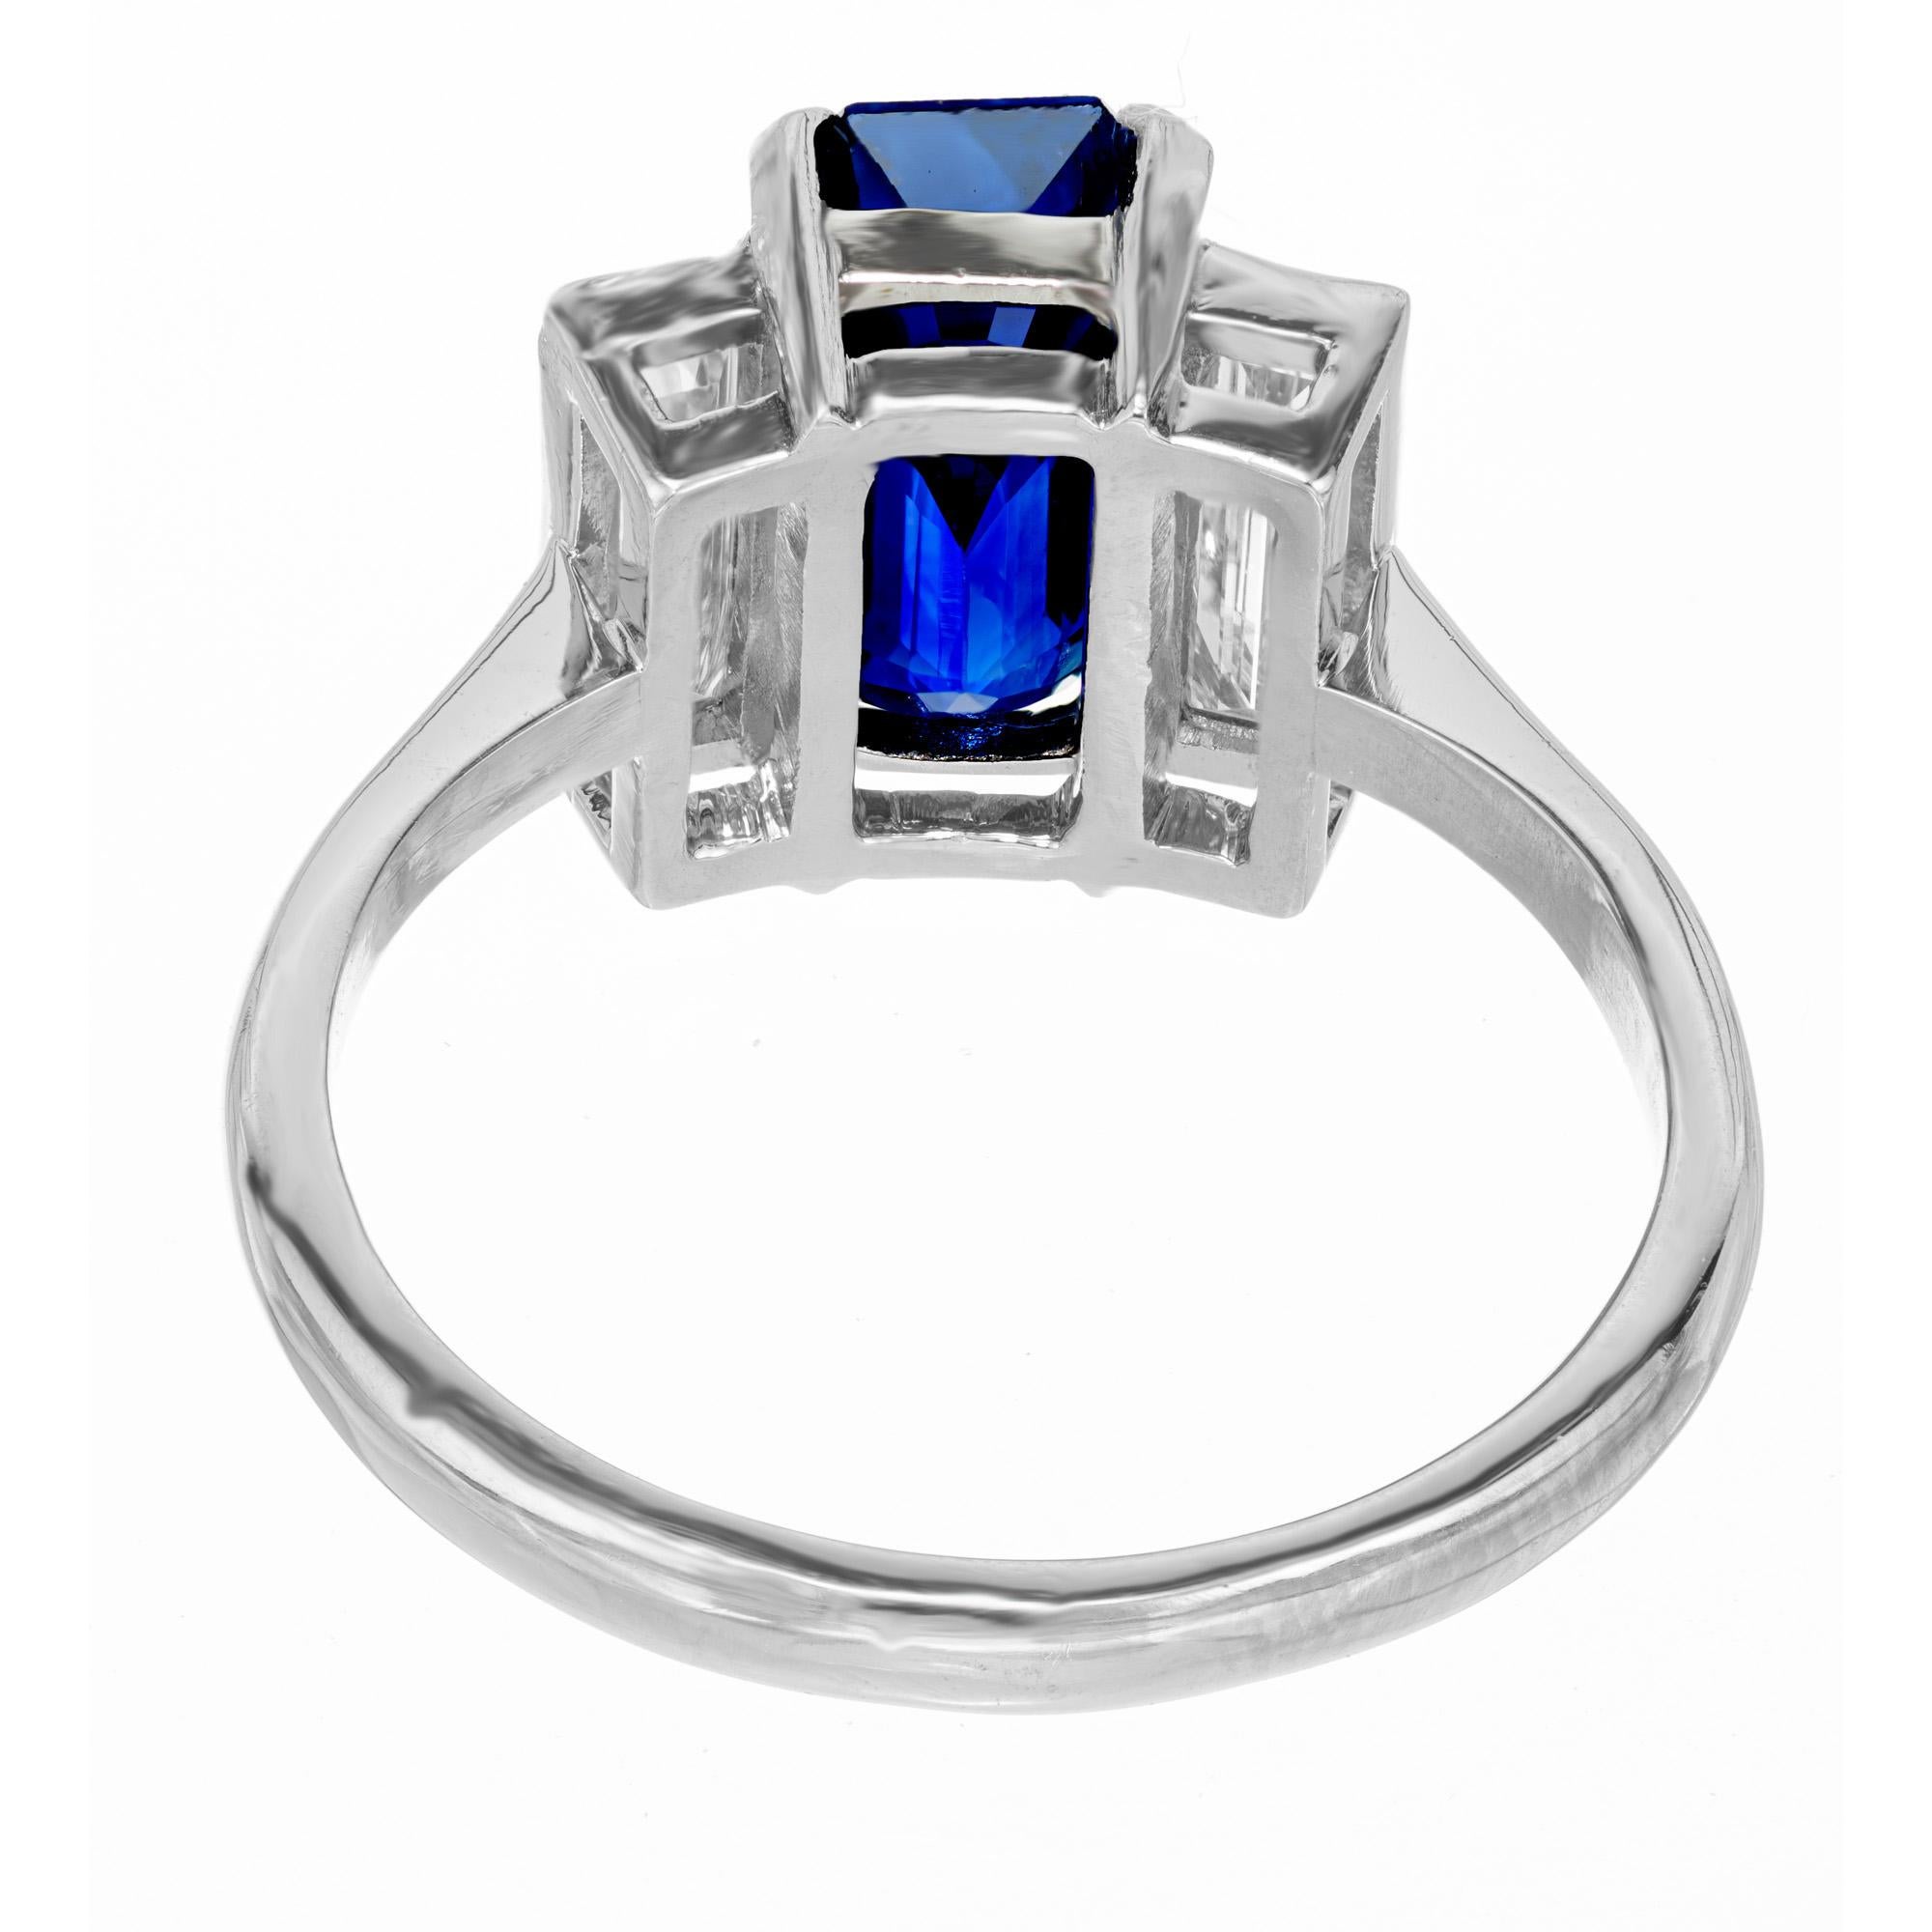 3.16 Carat Emerald Cut Sapphire Diamond Platinum Three-Stone Engagement Ring In Good Condition For Sale In Stamford, CT